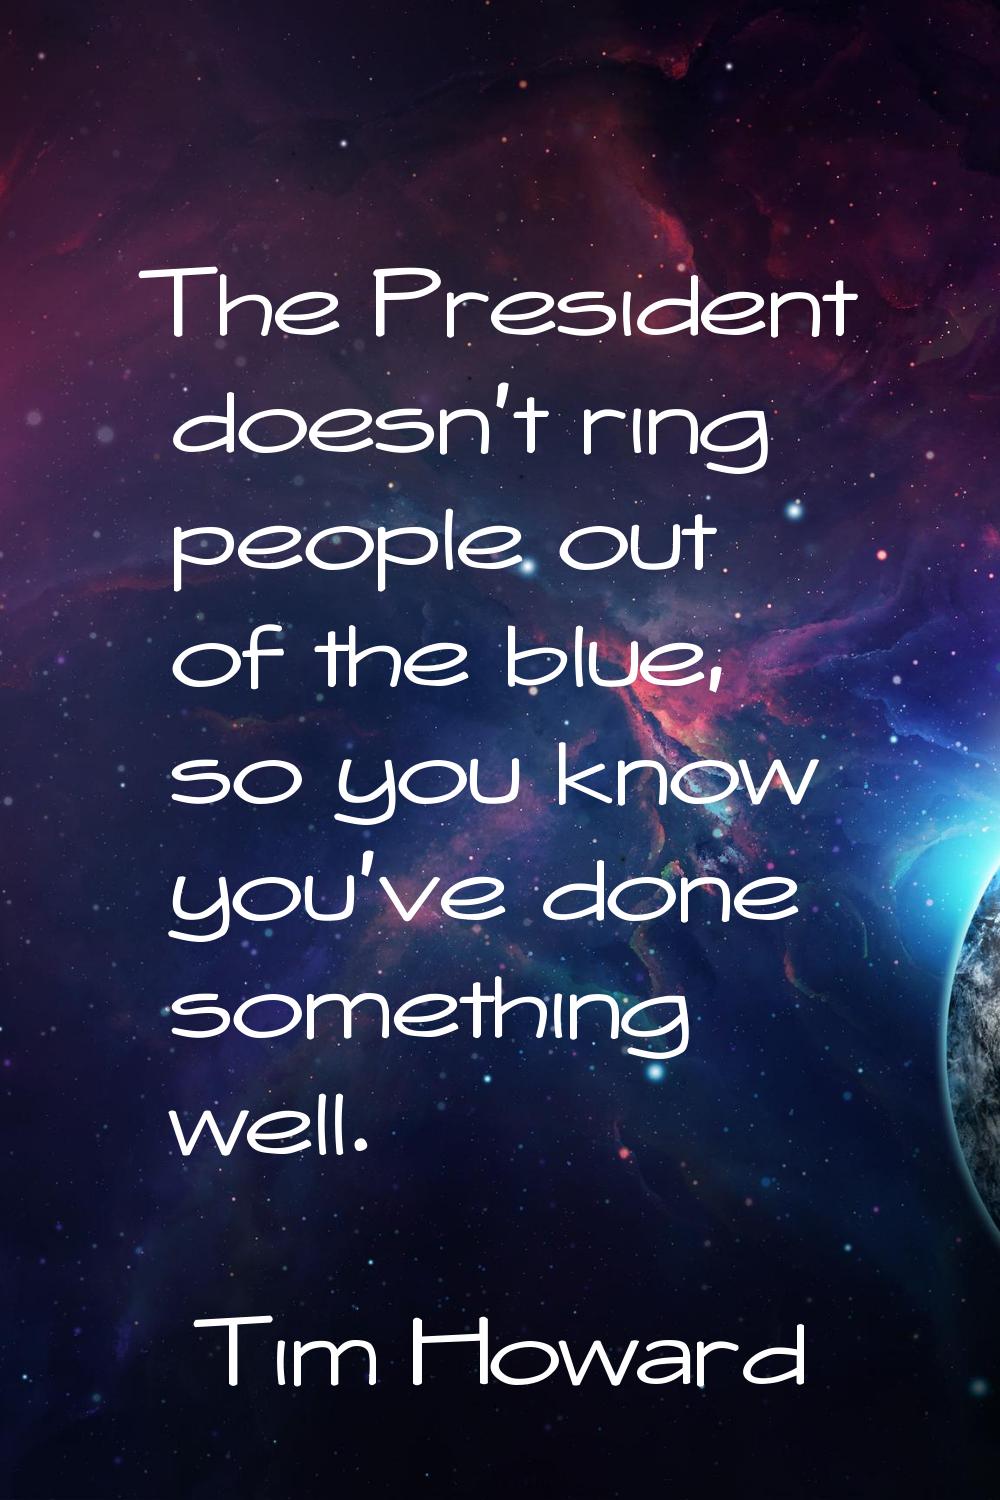 The President doesn't ring people out of the blue, so you know you've done something well.